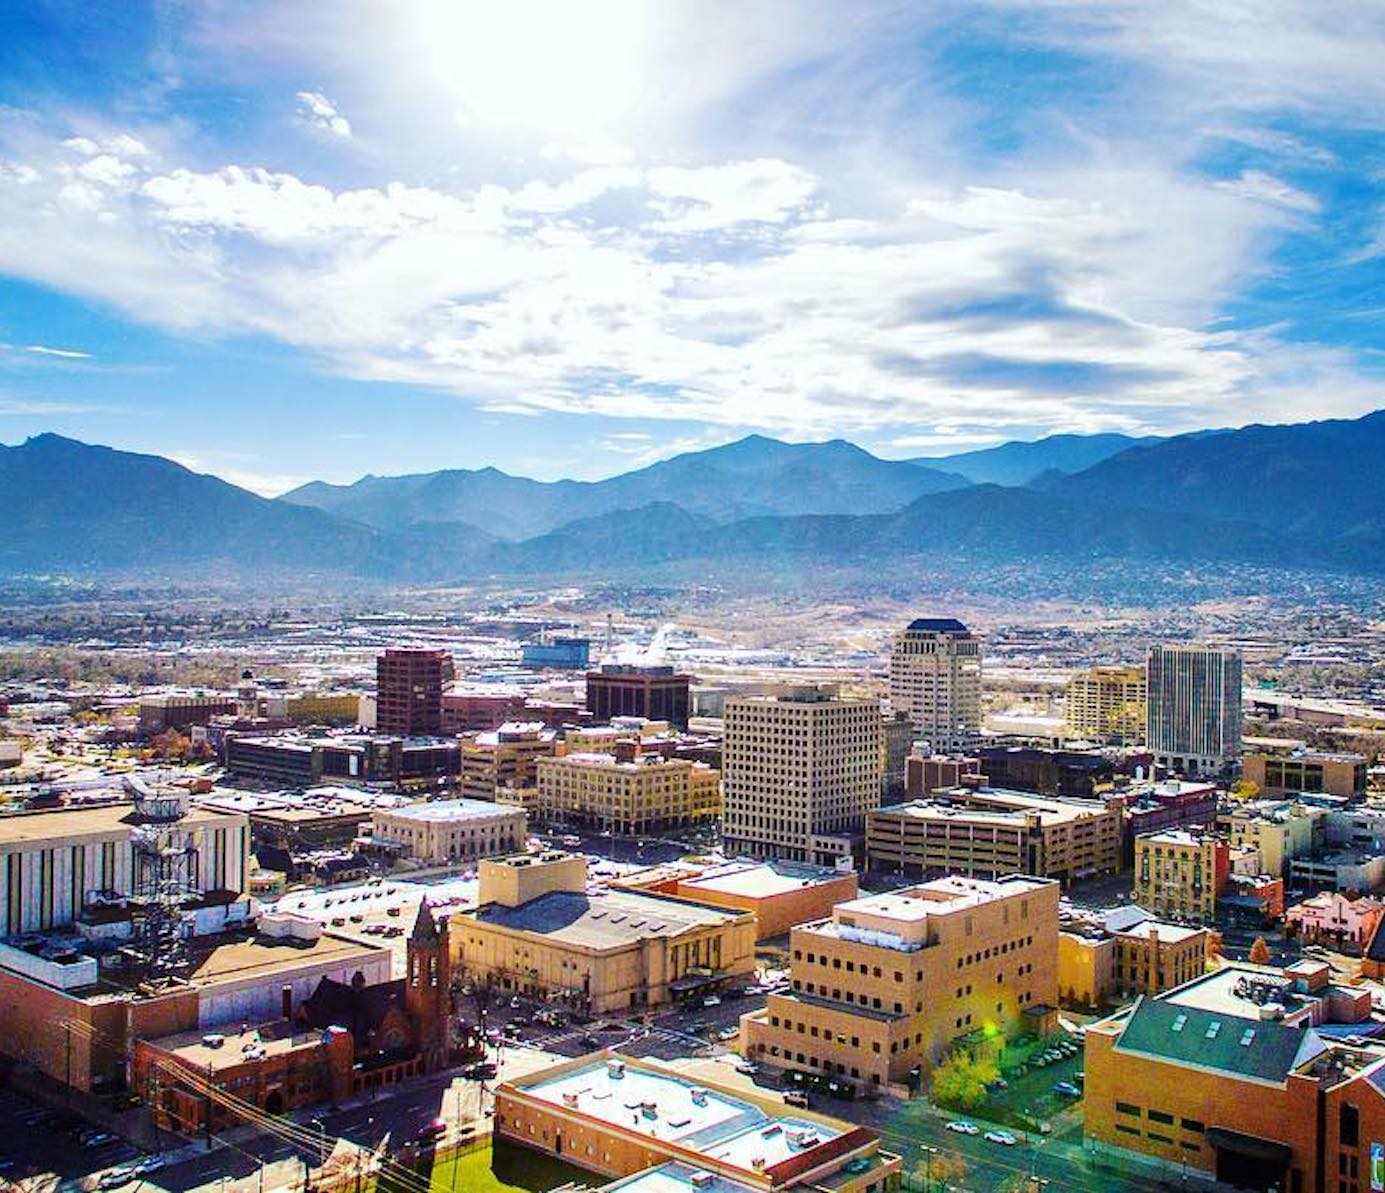 Colorado Springs, Colorado city with mountains in the background and a cloudy, blue sky